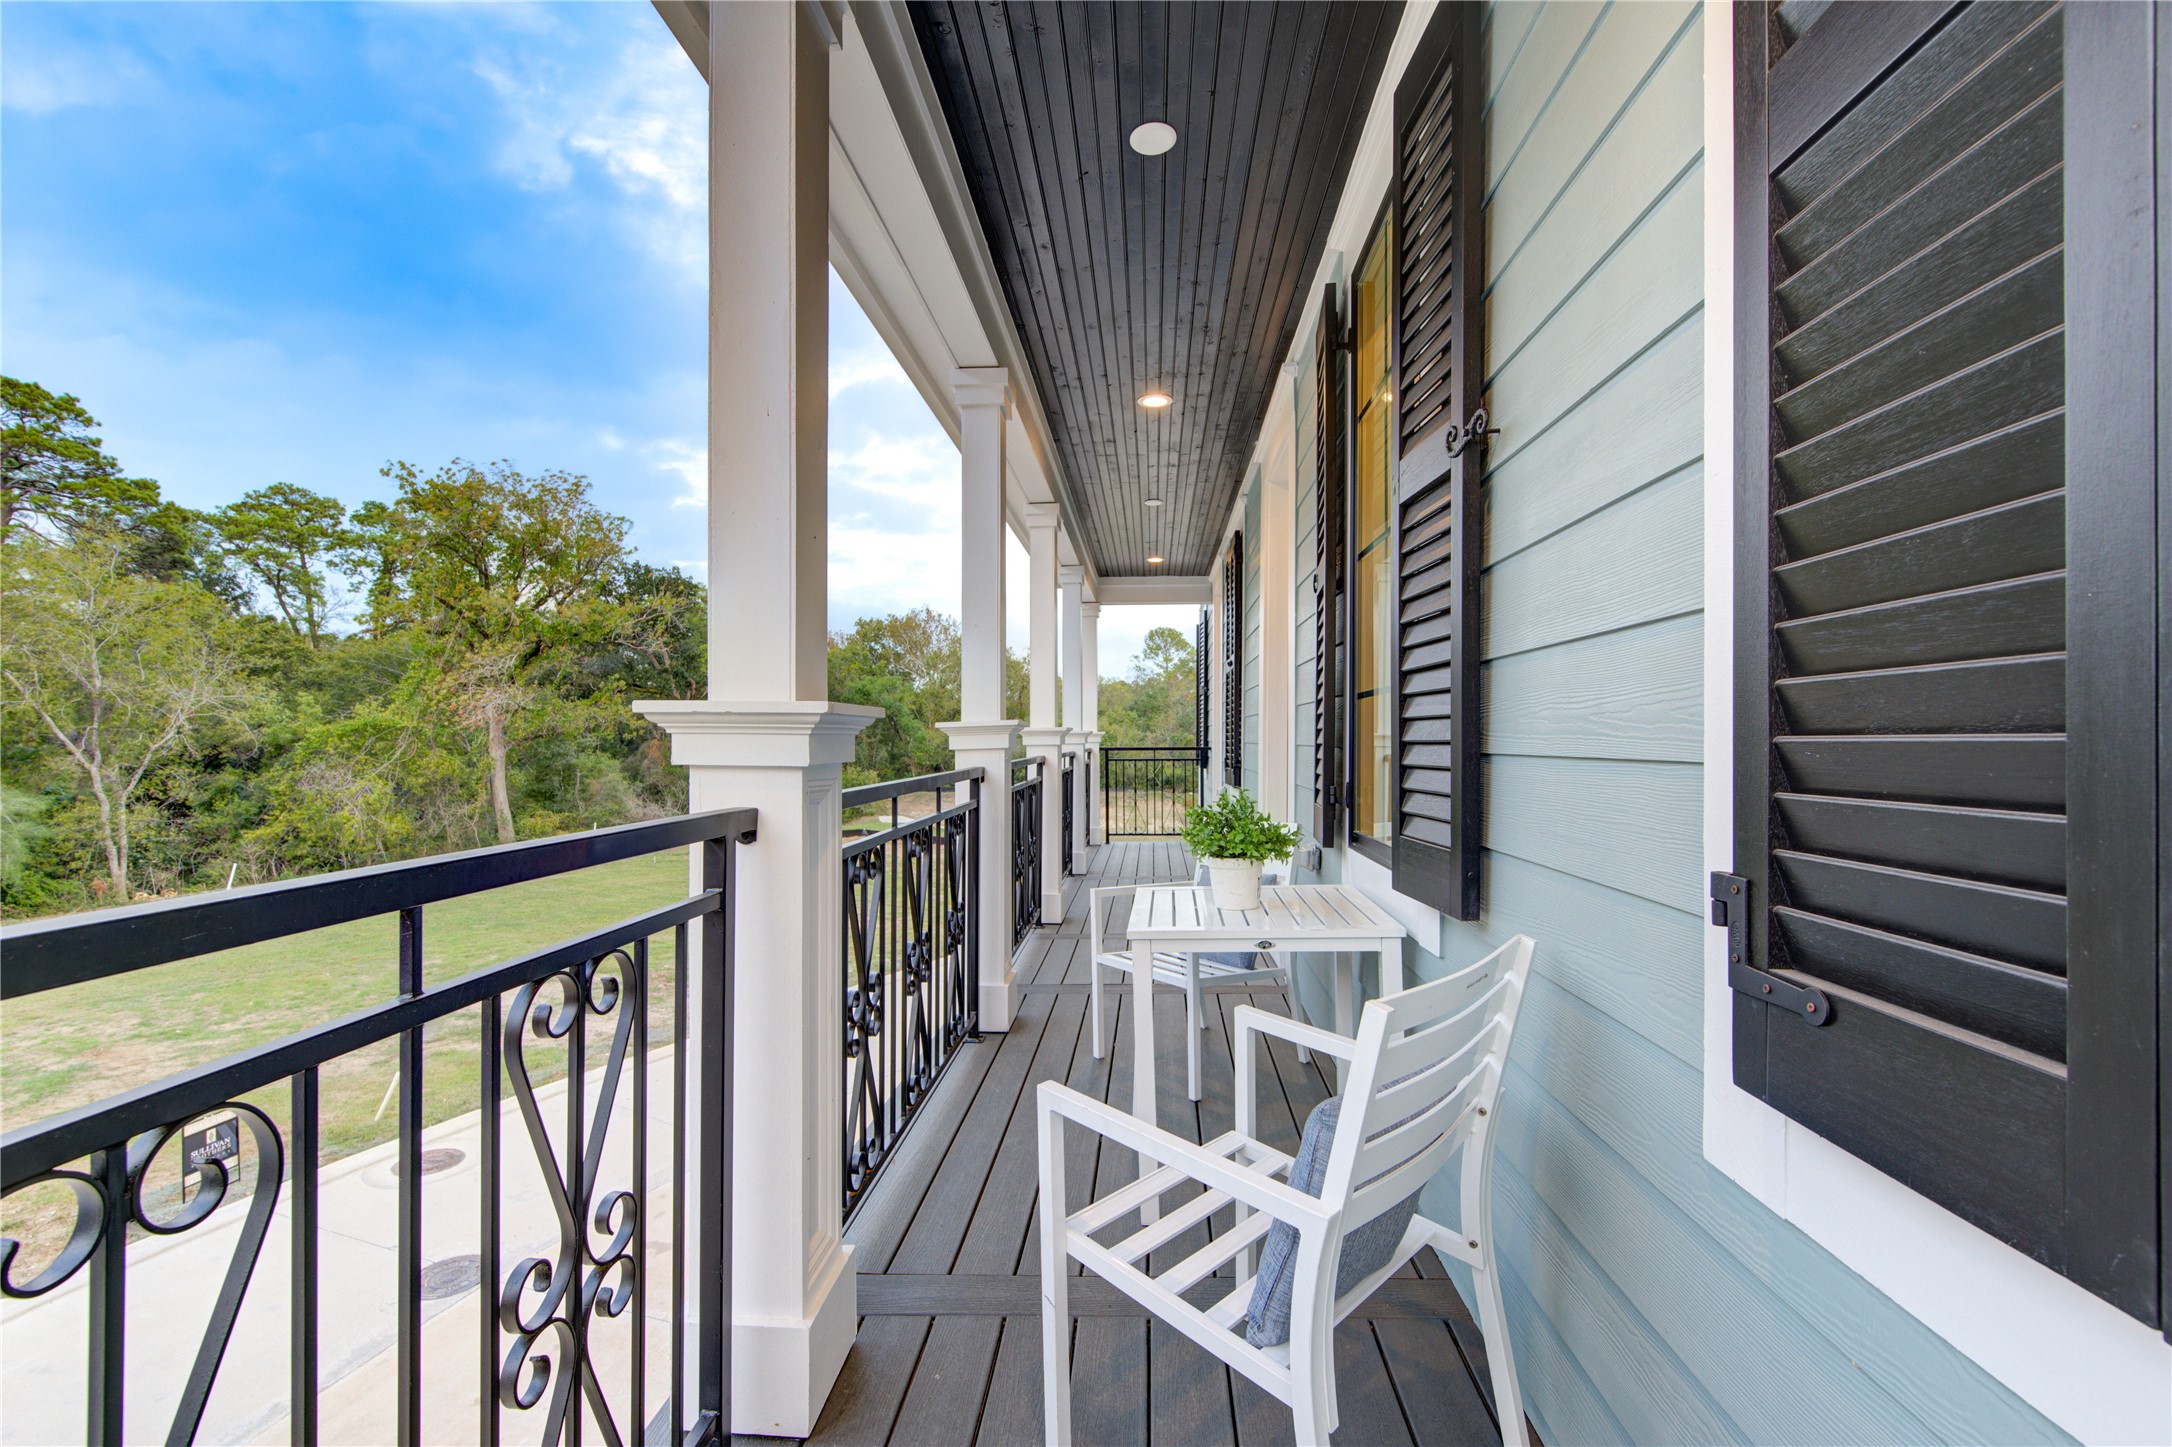 Sullivan Brothers is known for homes with Southern porch living and this home offers both an expansive front porch and balconies.